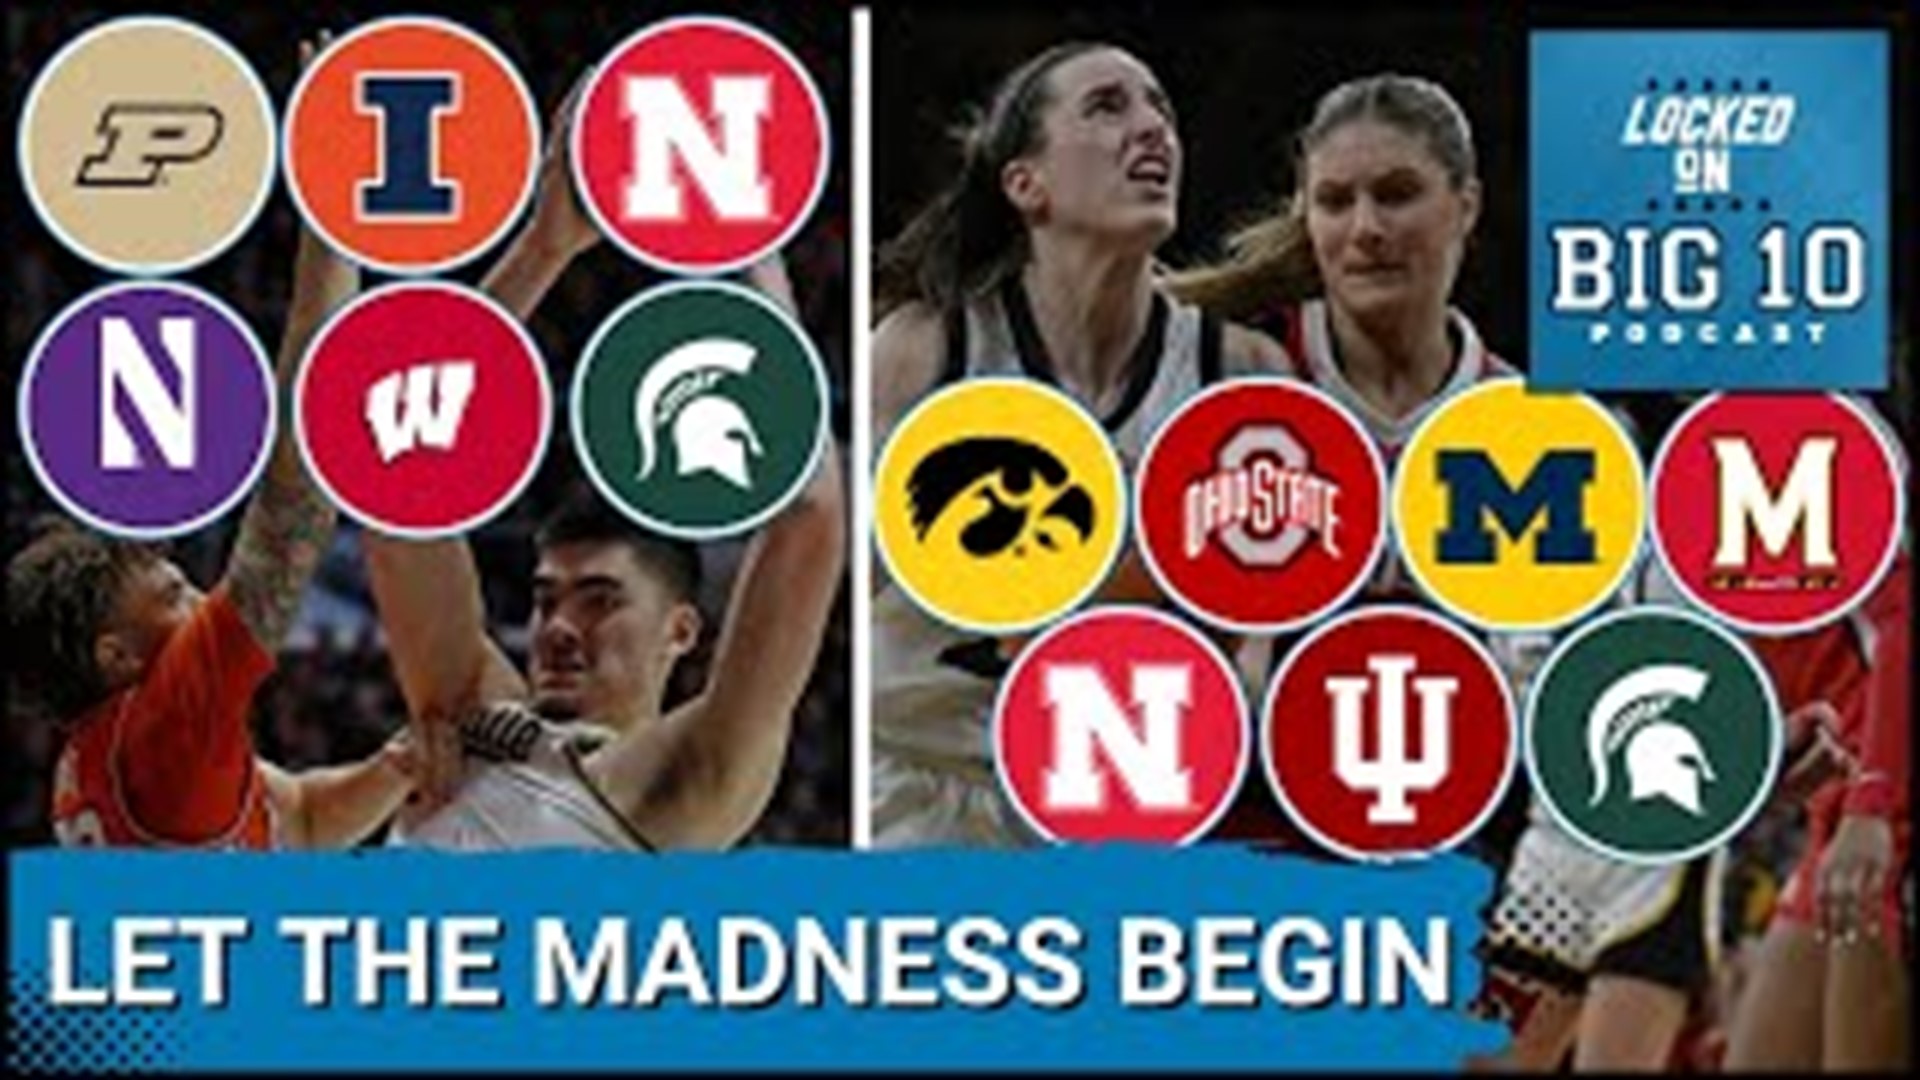 Six Men's and seven Women's Big 10 teams are going to the NCAA Basketball Tournament following Selection Sunday. On the Men's side, Purdue earned a top seed.